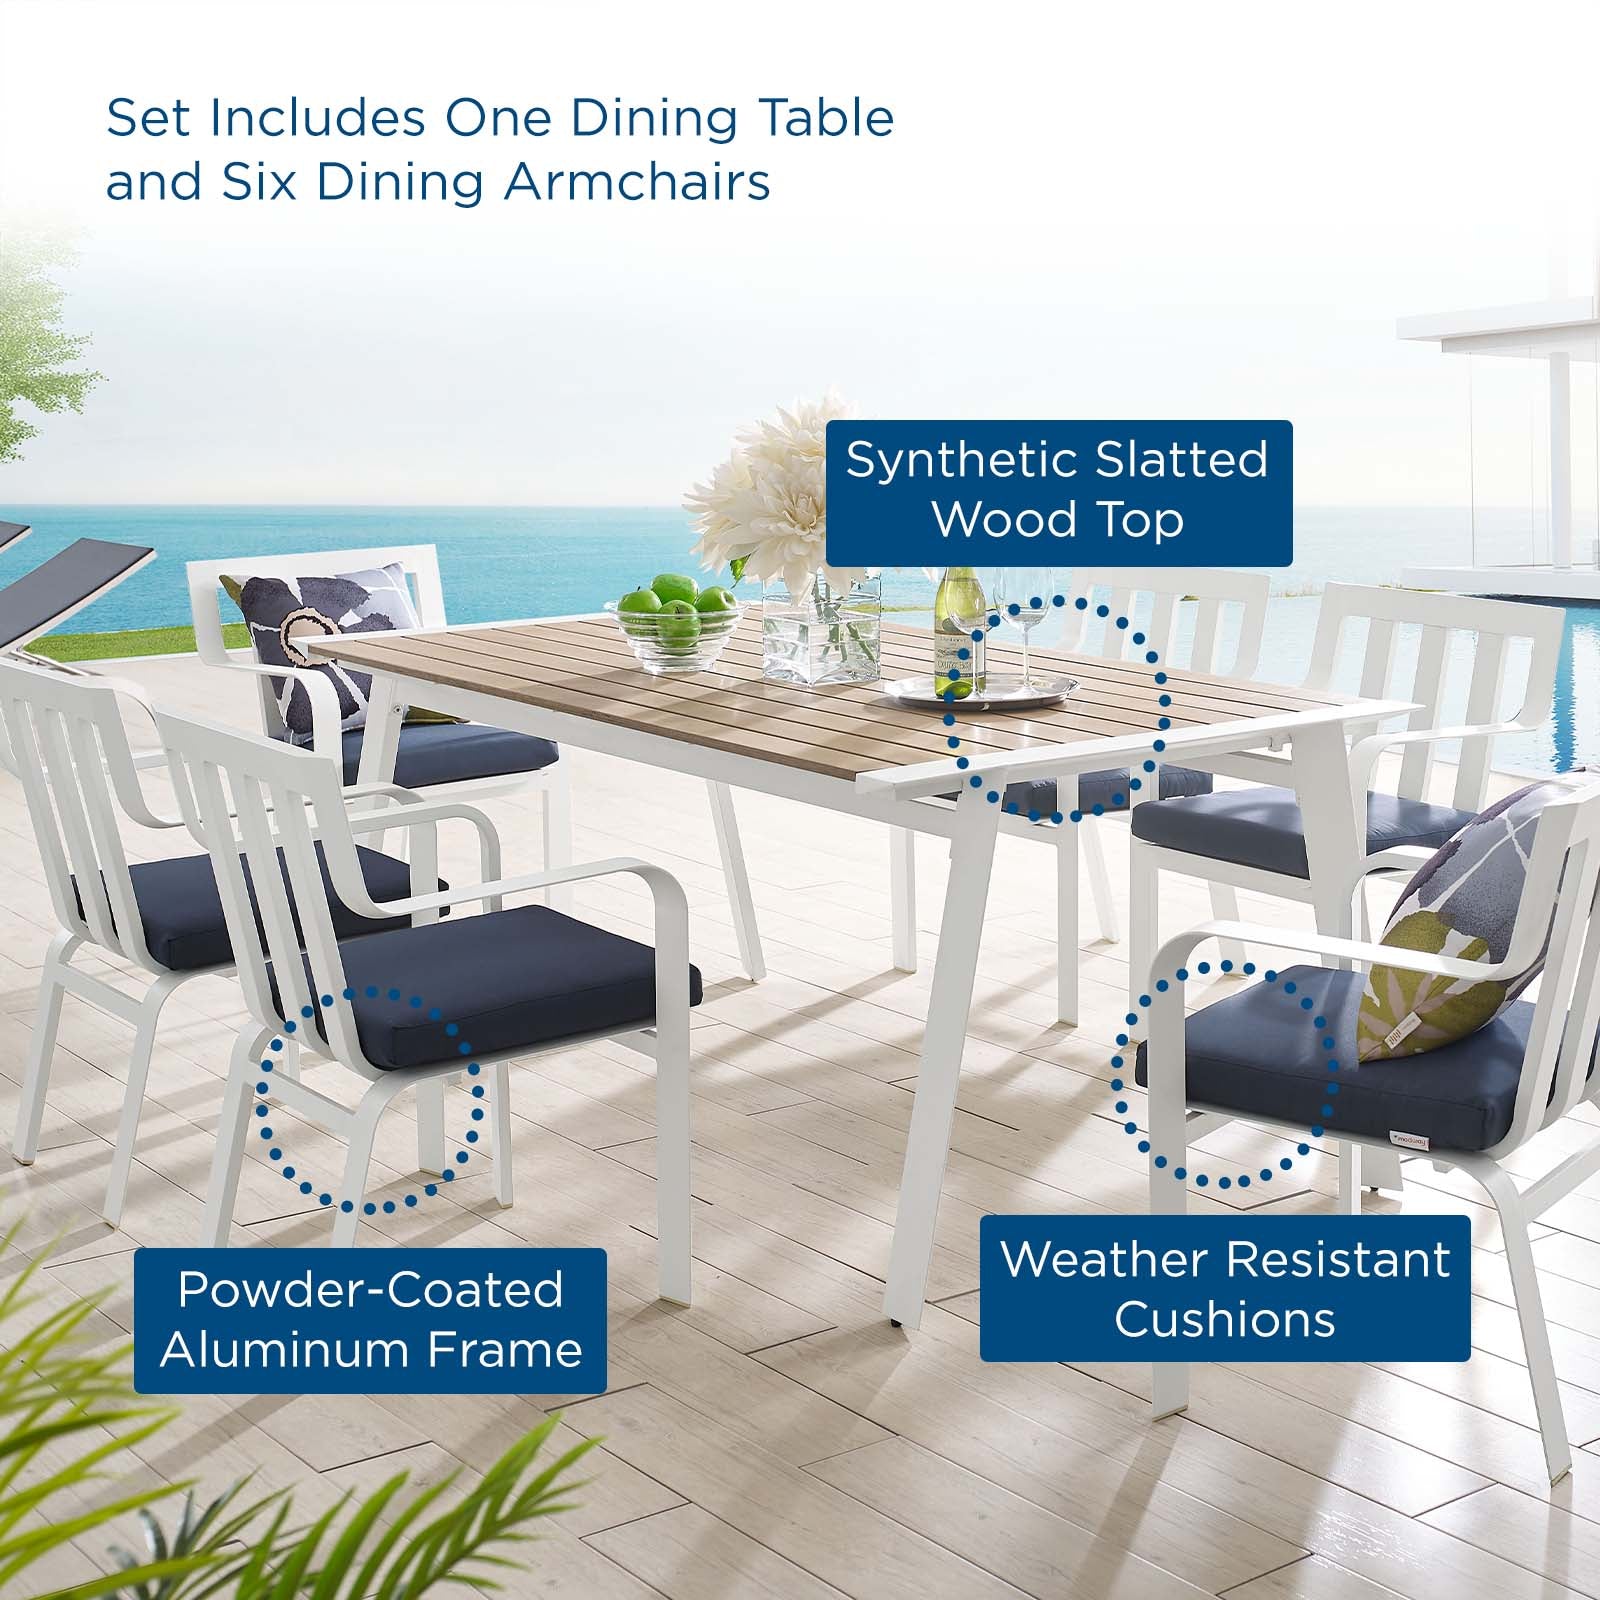 Modway Outdoor Dining Sets - Baxley 7 Piece Outdoor Patio Aluminum Dining Set White Navy